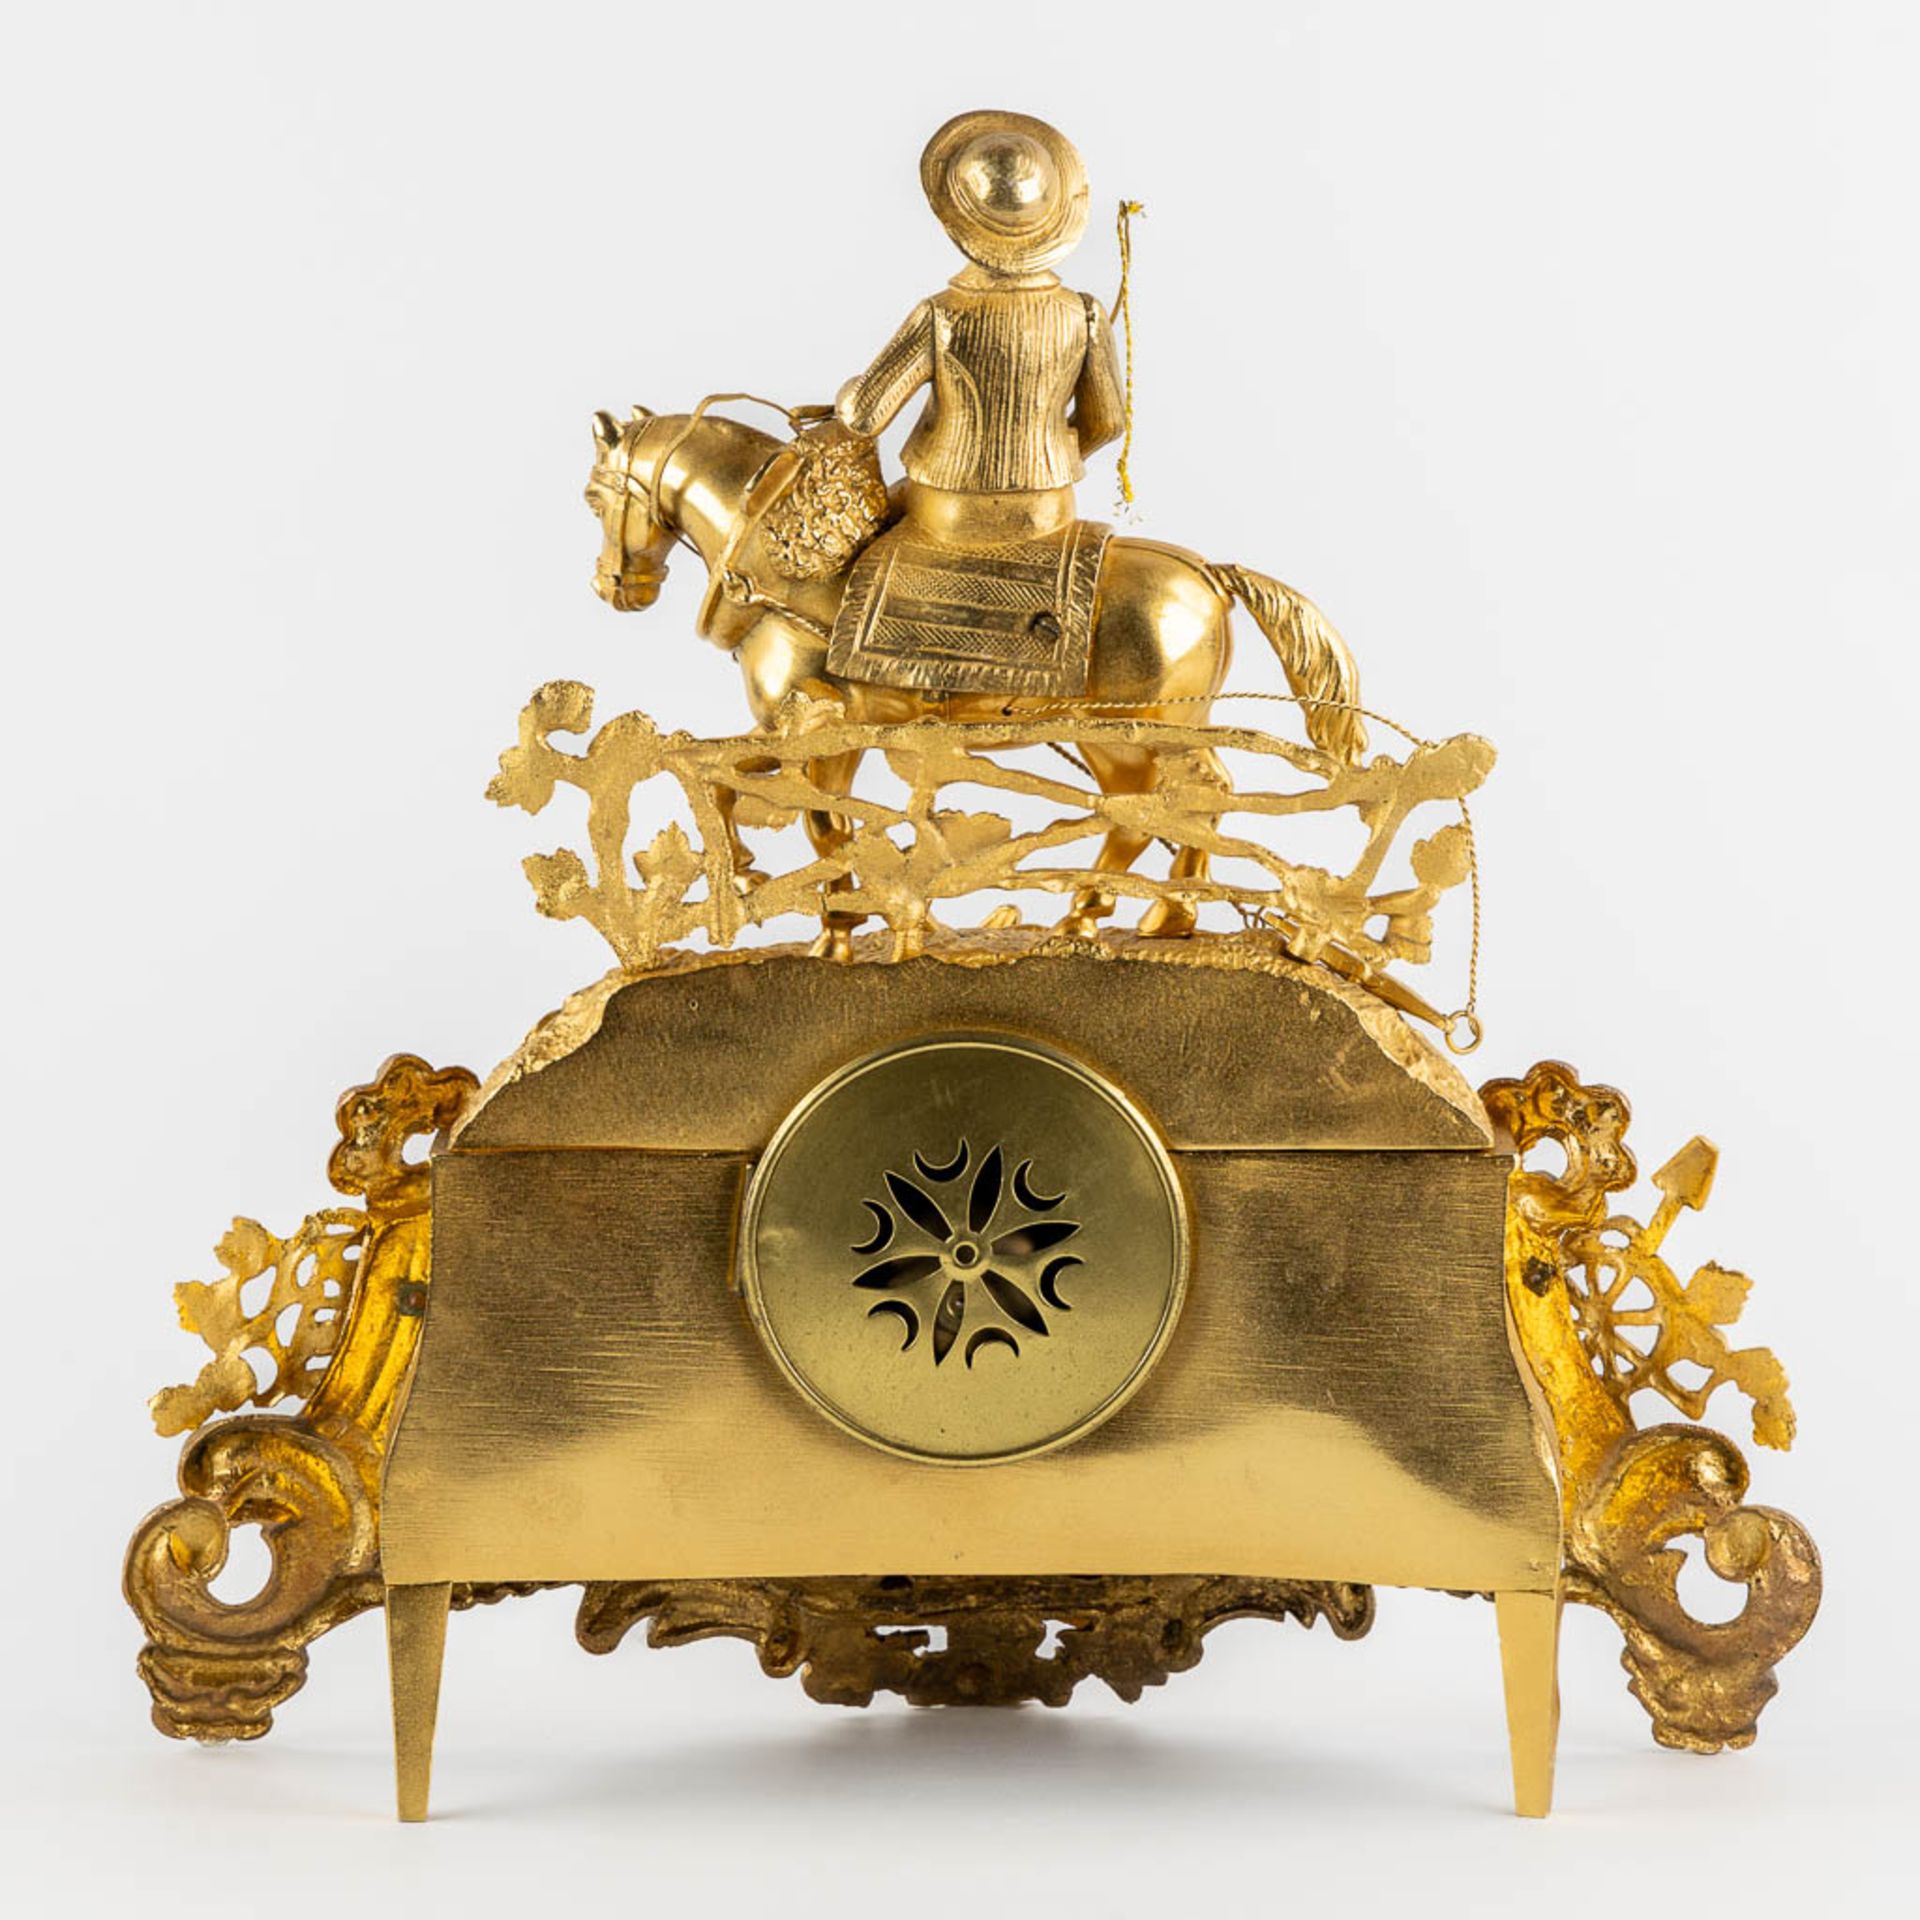 A mantle clock with a 'Horse Rider', gilt bronze. France, 19th C. (L:11,5 x W:38 x H:37 cm) - Image 5 of 12